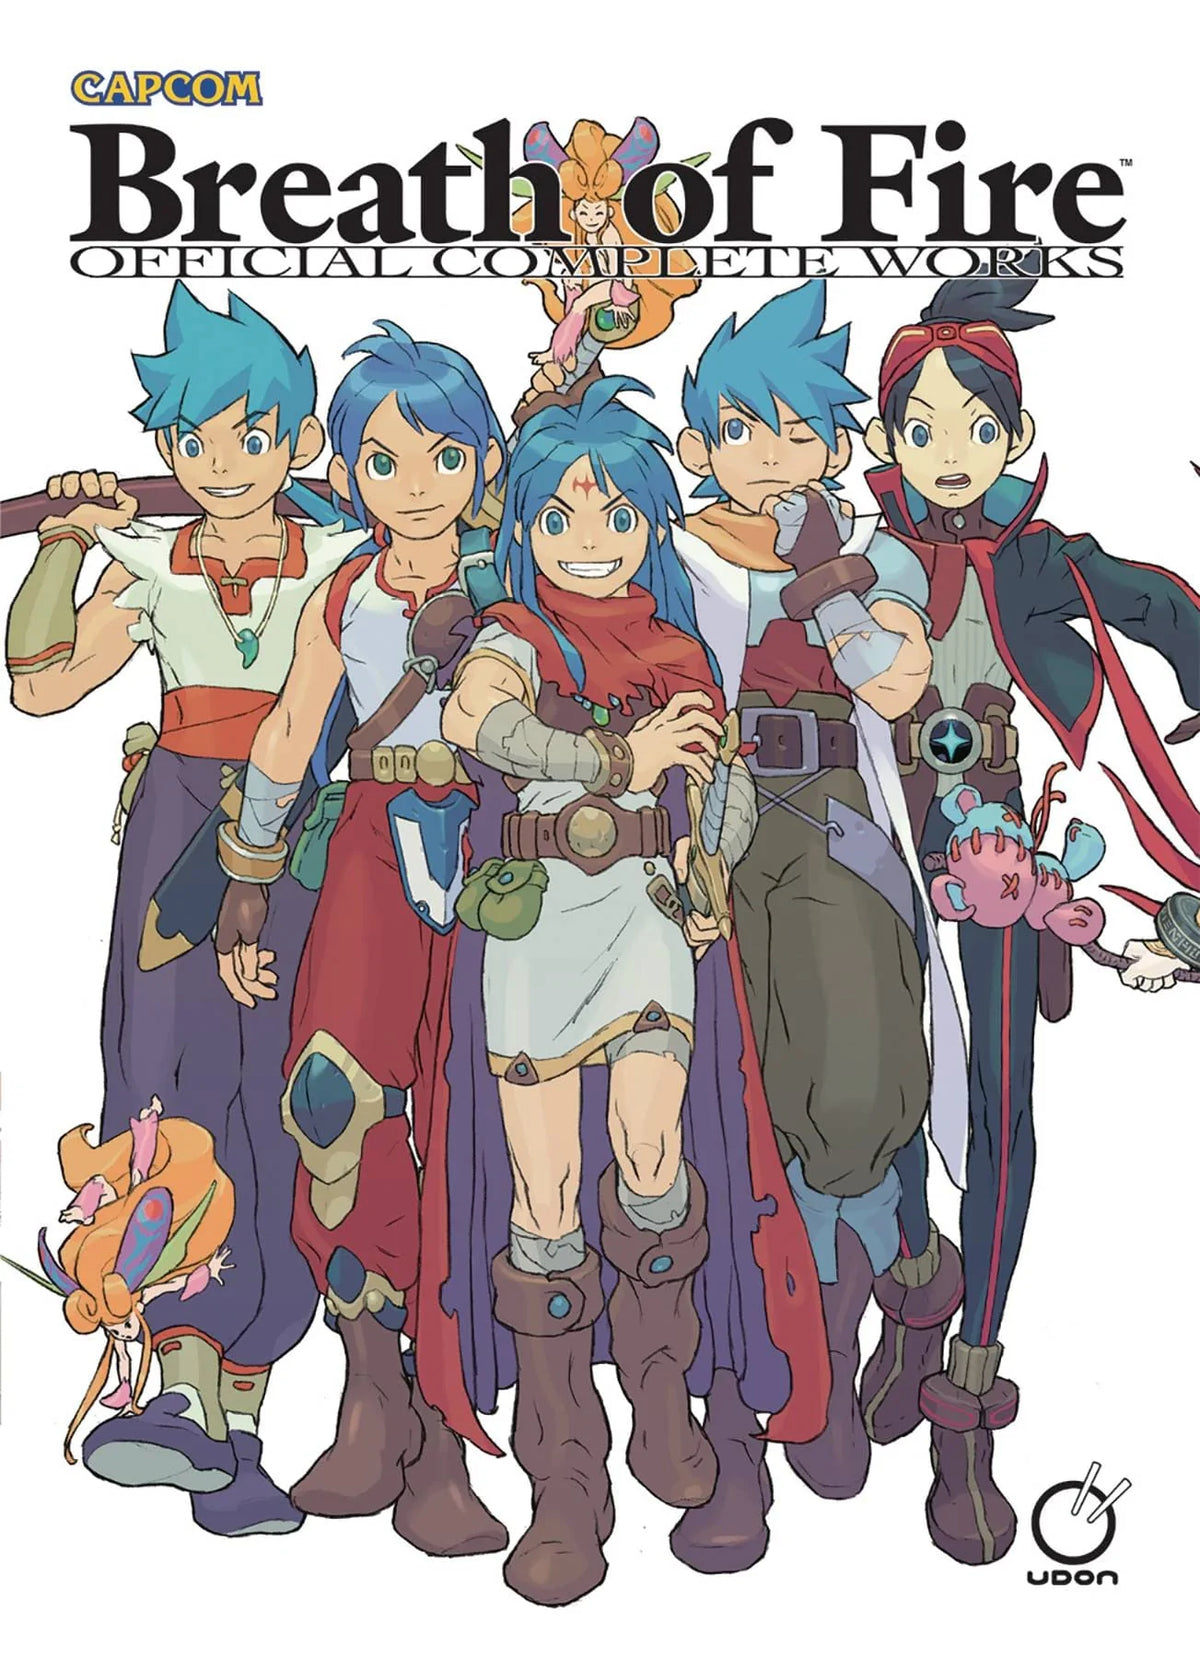 BREATH OF FIRE OFFICIAL COMPLETE WORKS HC - Third Eye